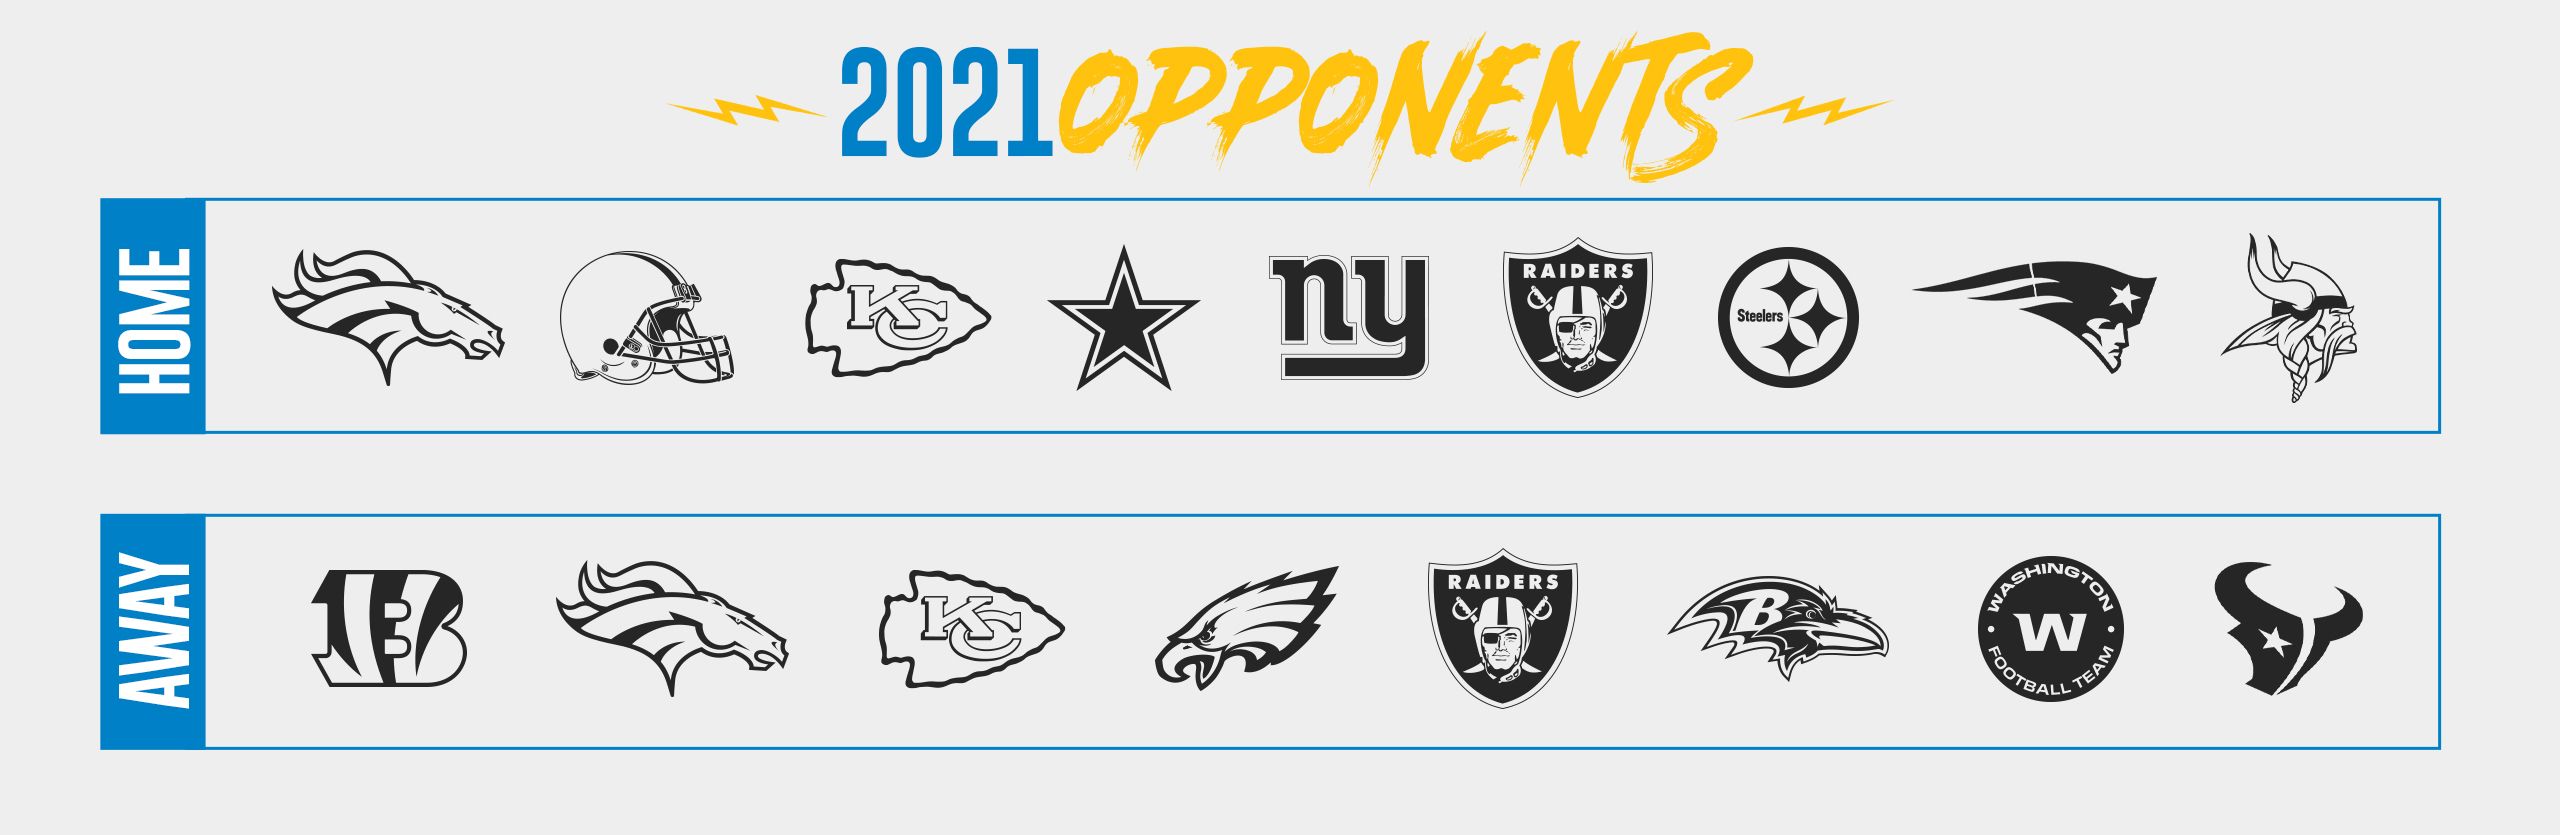 chargers home games 2021